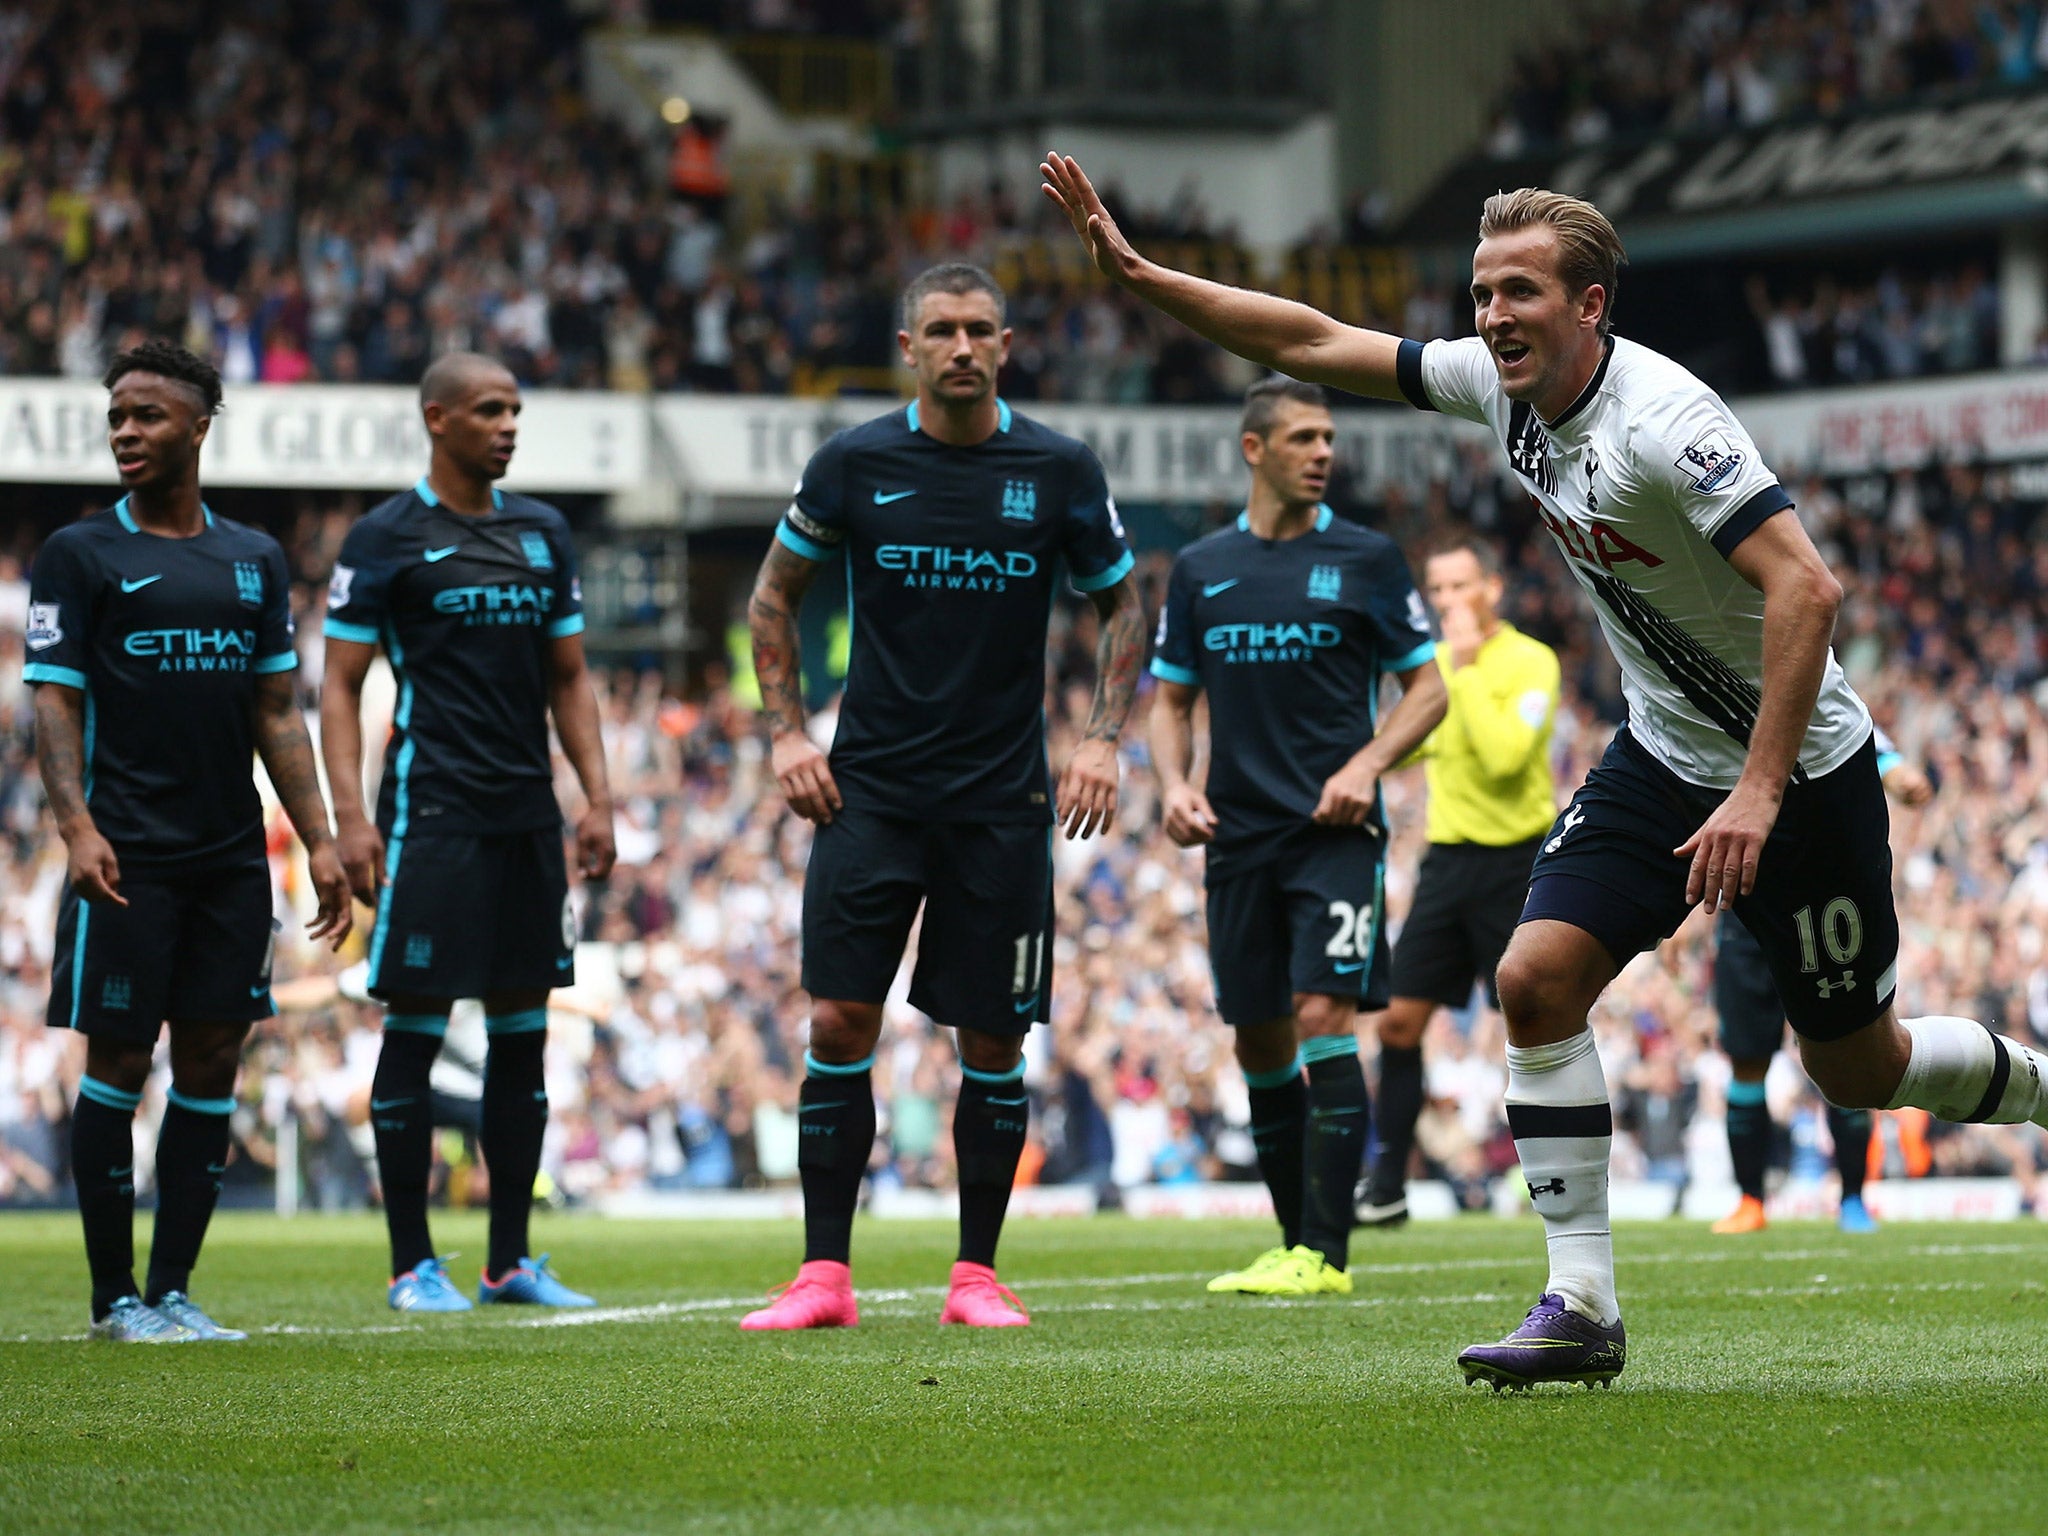 Harry Kane celebrates his goal as City players watch on